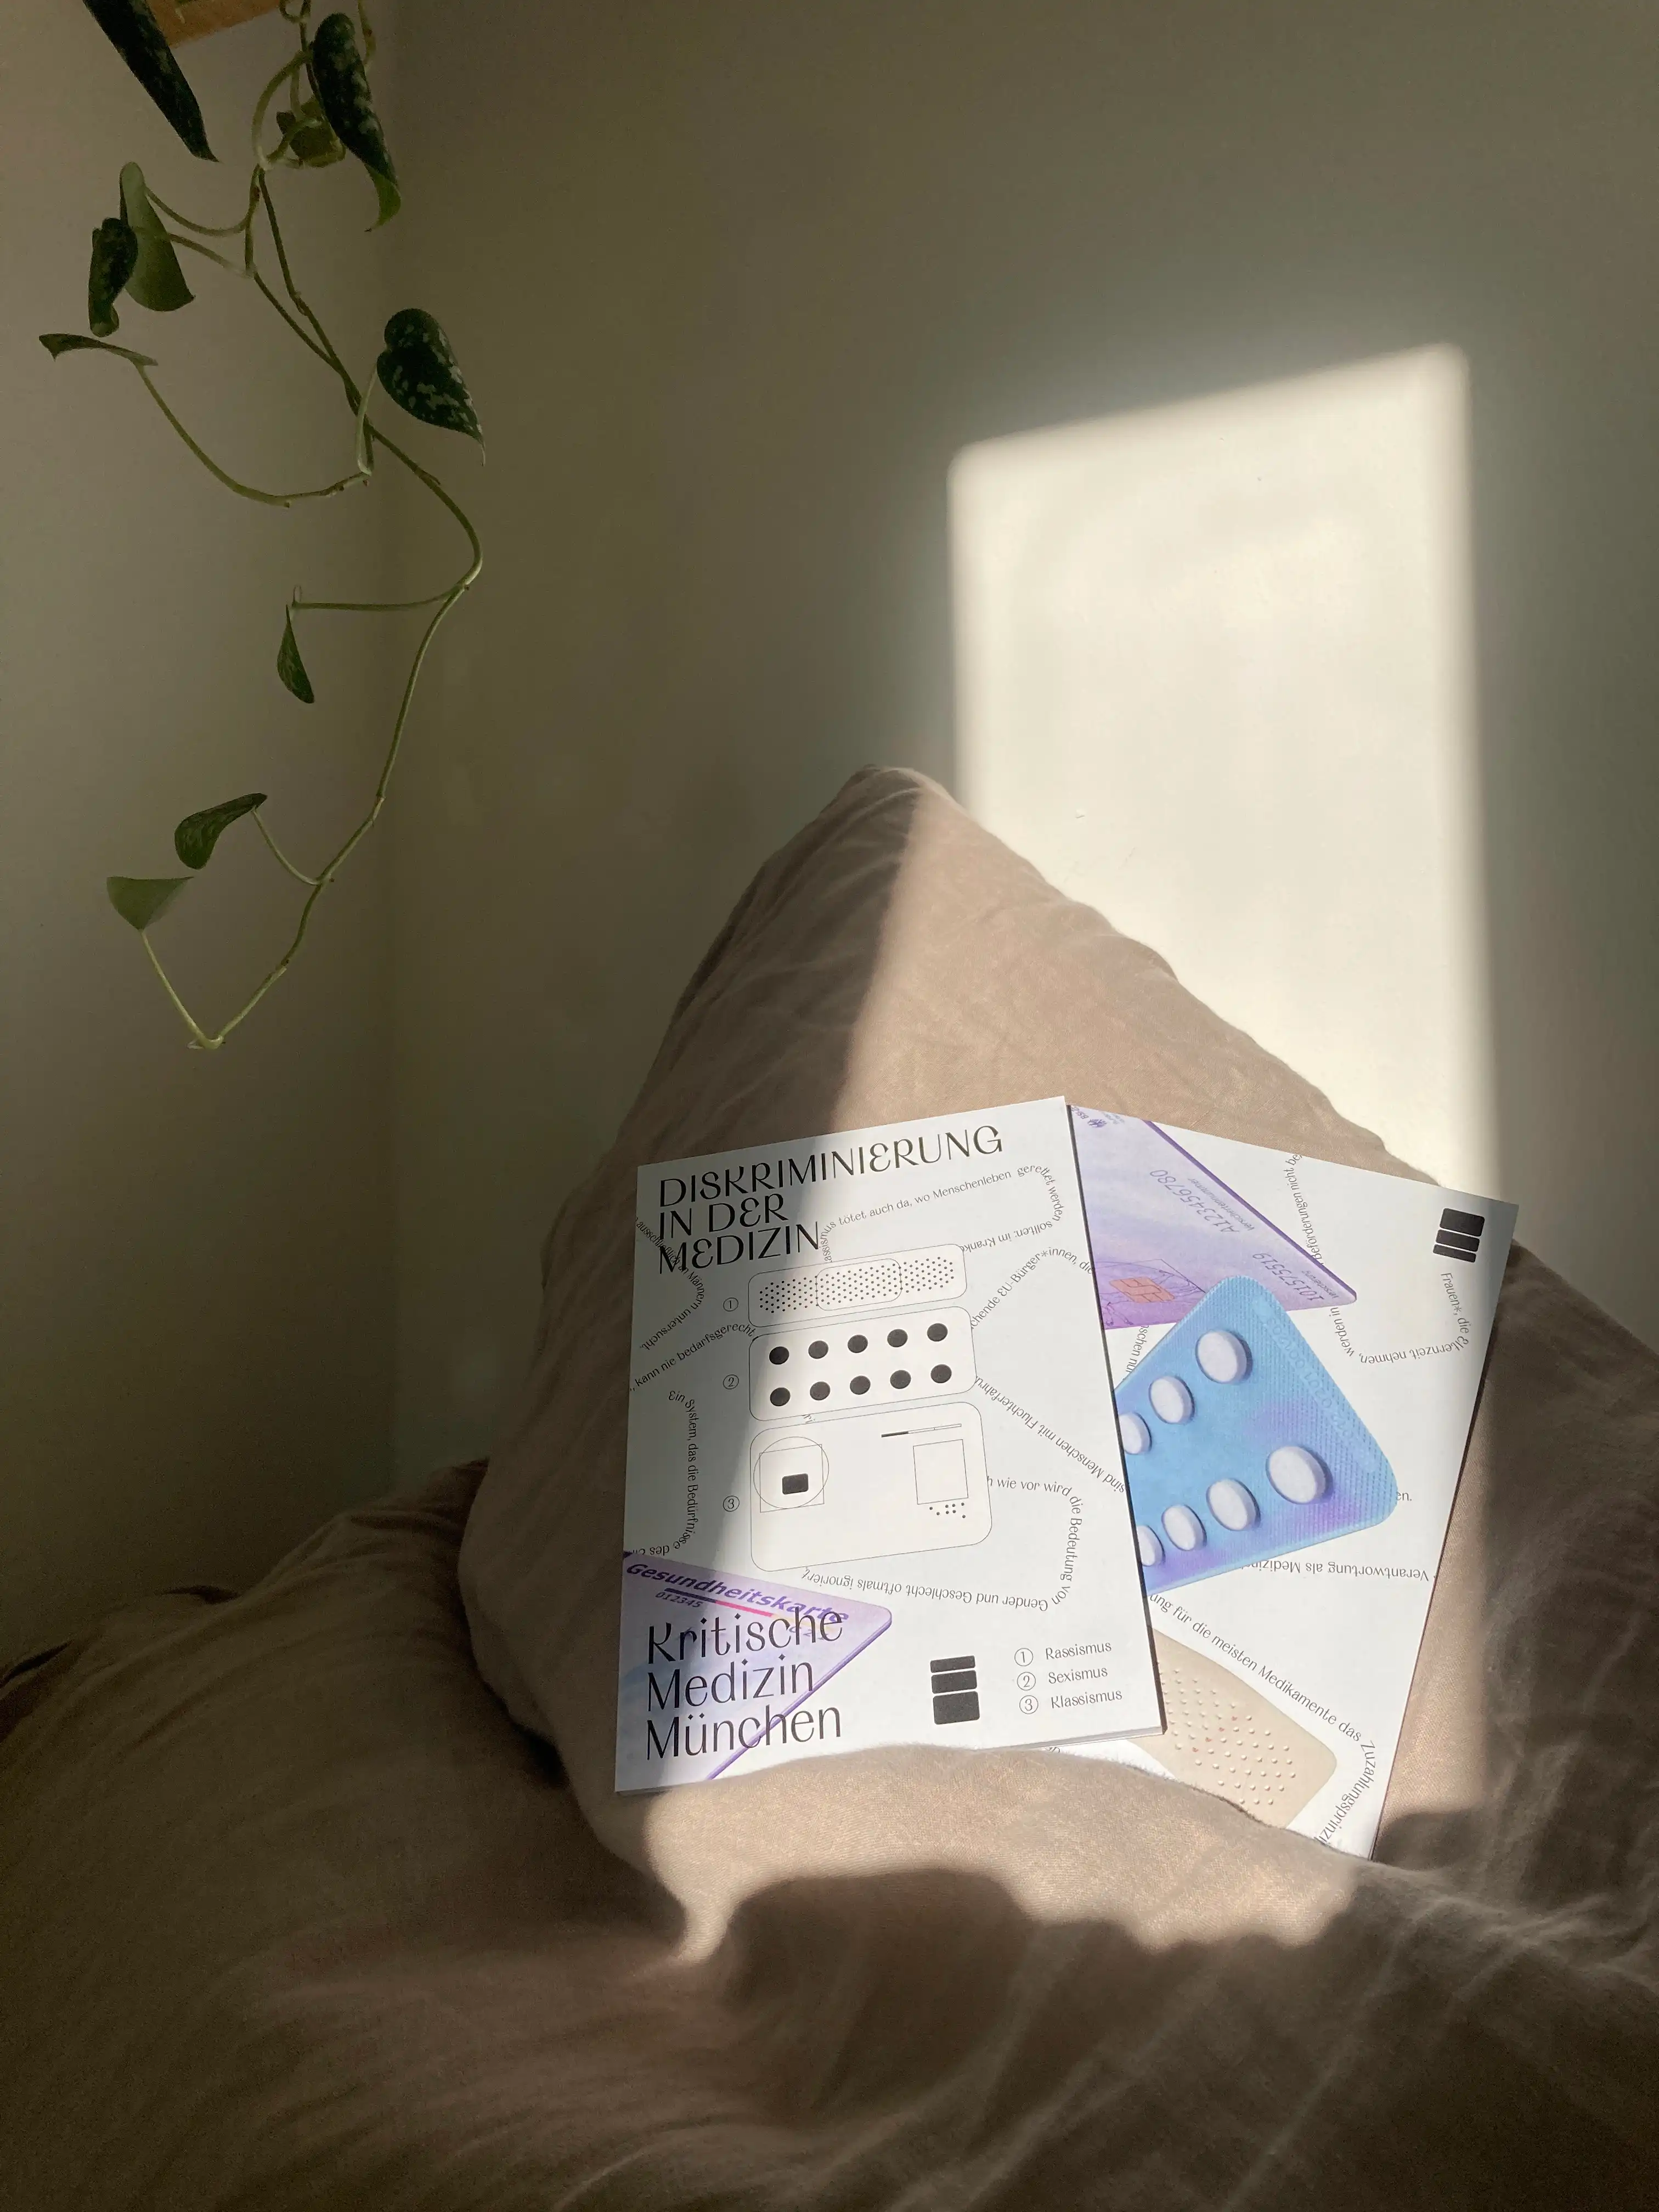 reader displayed on a pillow